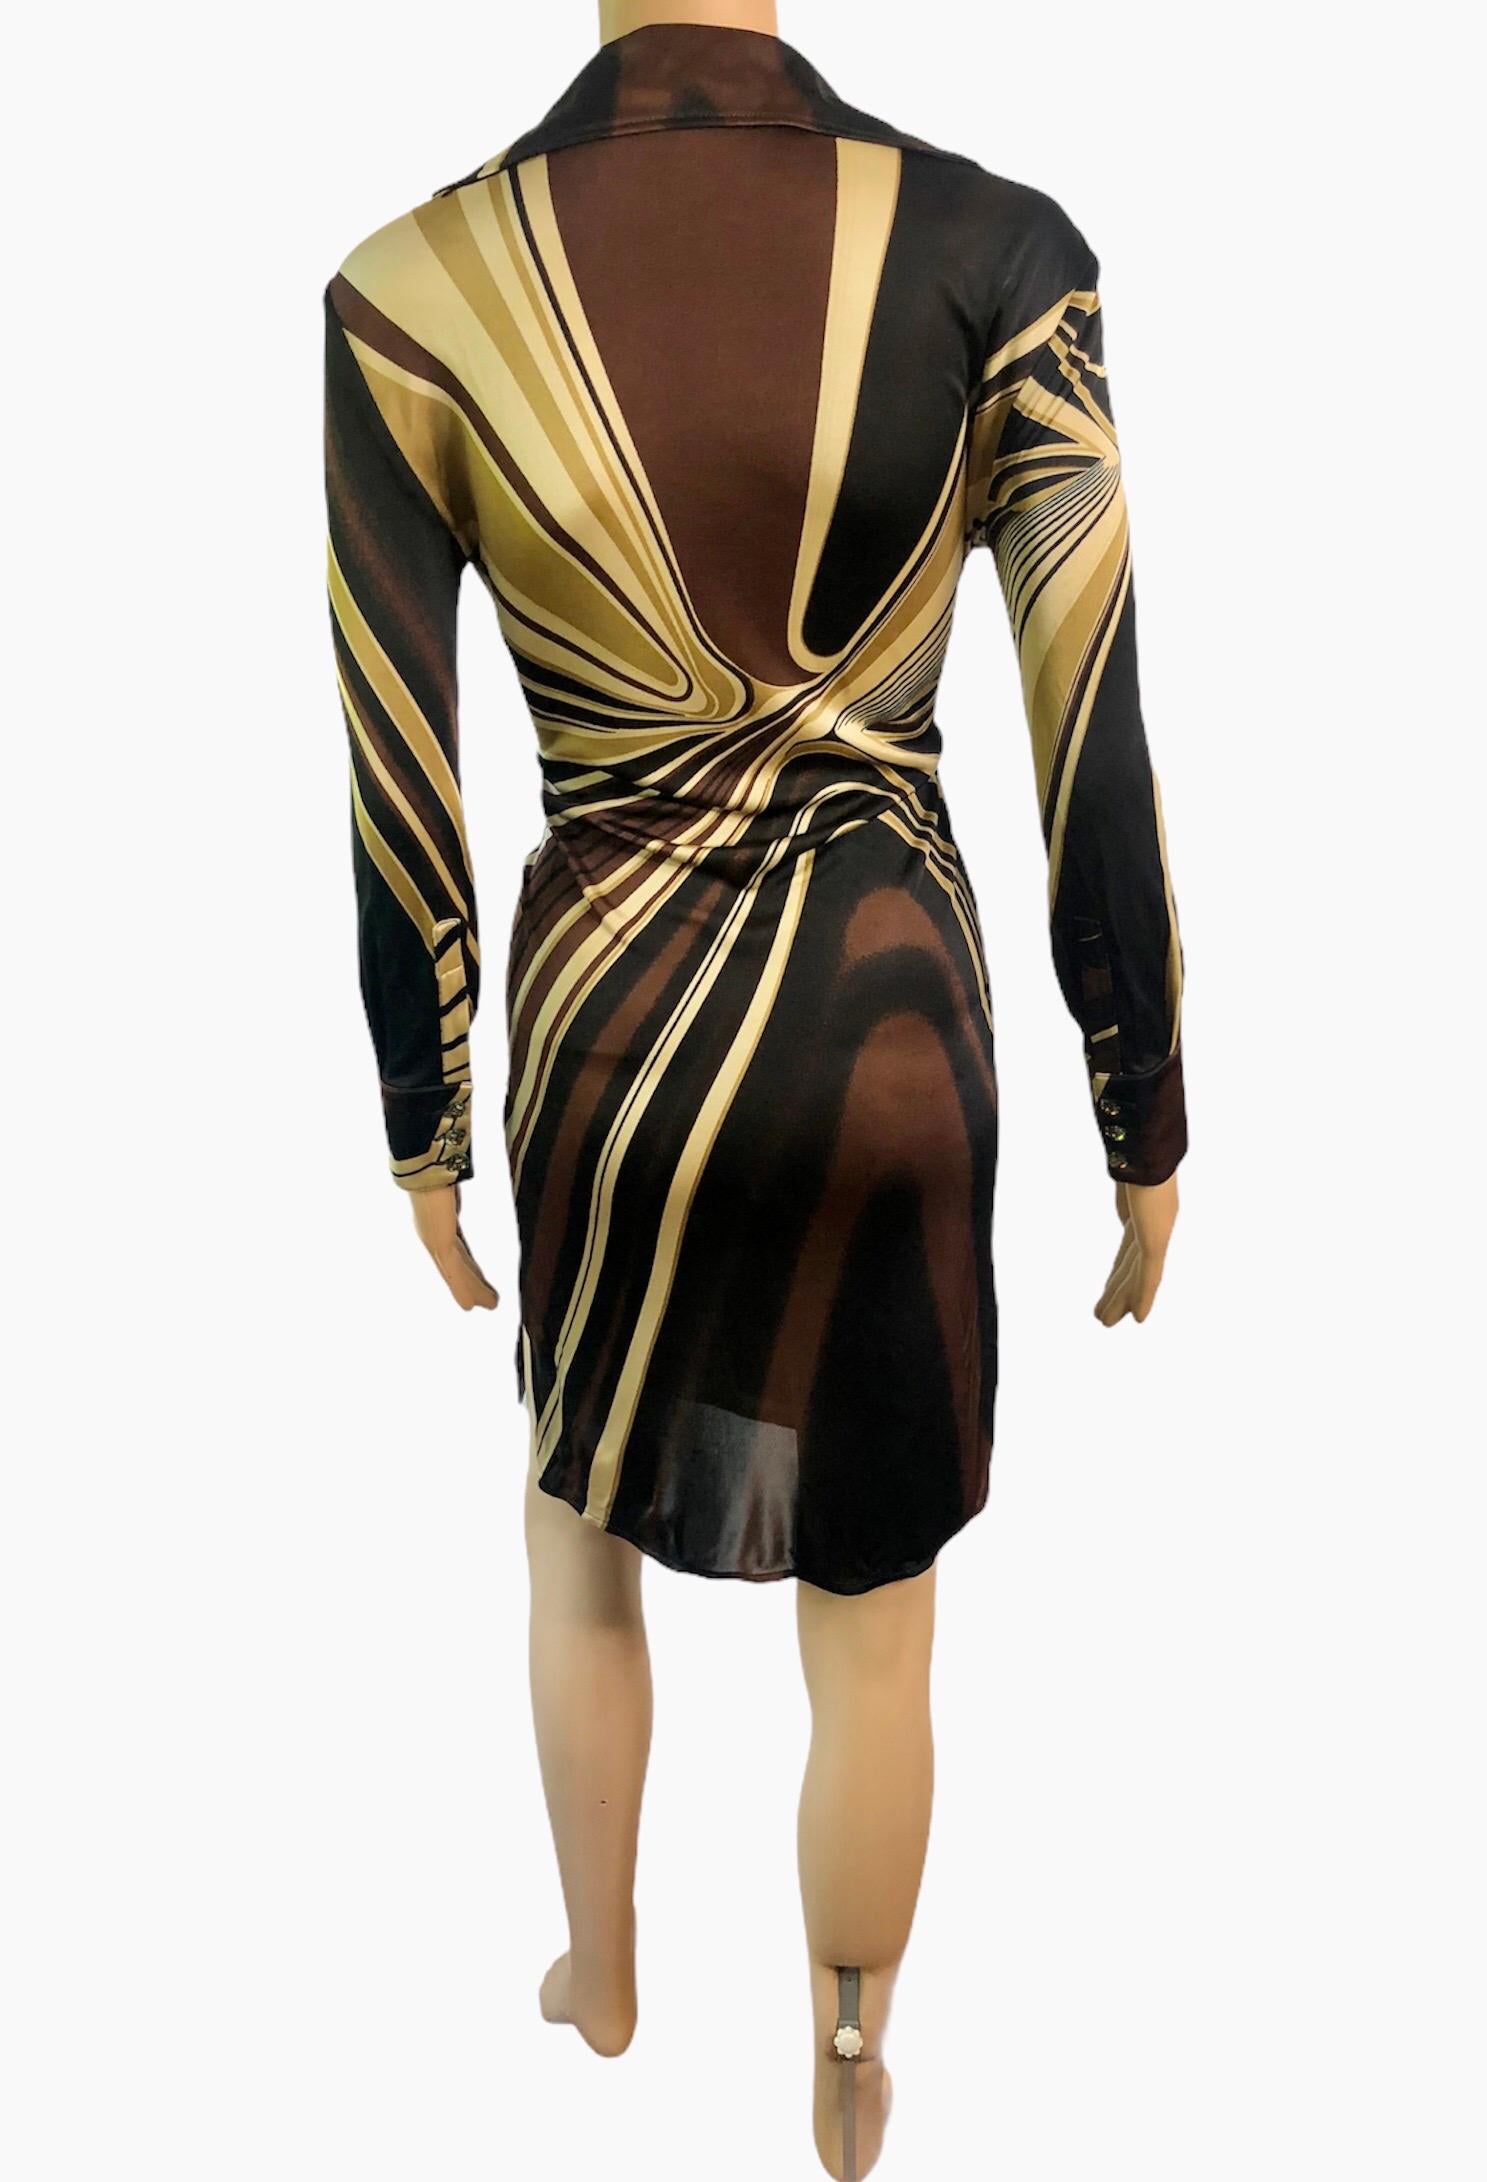 Gianni Versace F/W 2000 Wrap Plunged Geometric Print Dress In Good Condition For Sale In Naples, FL